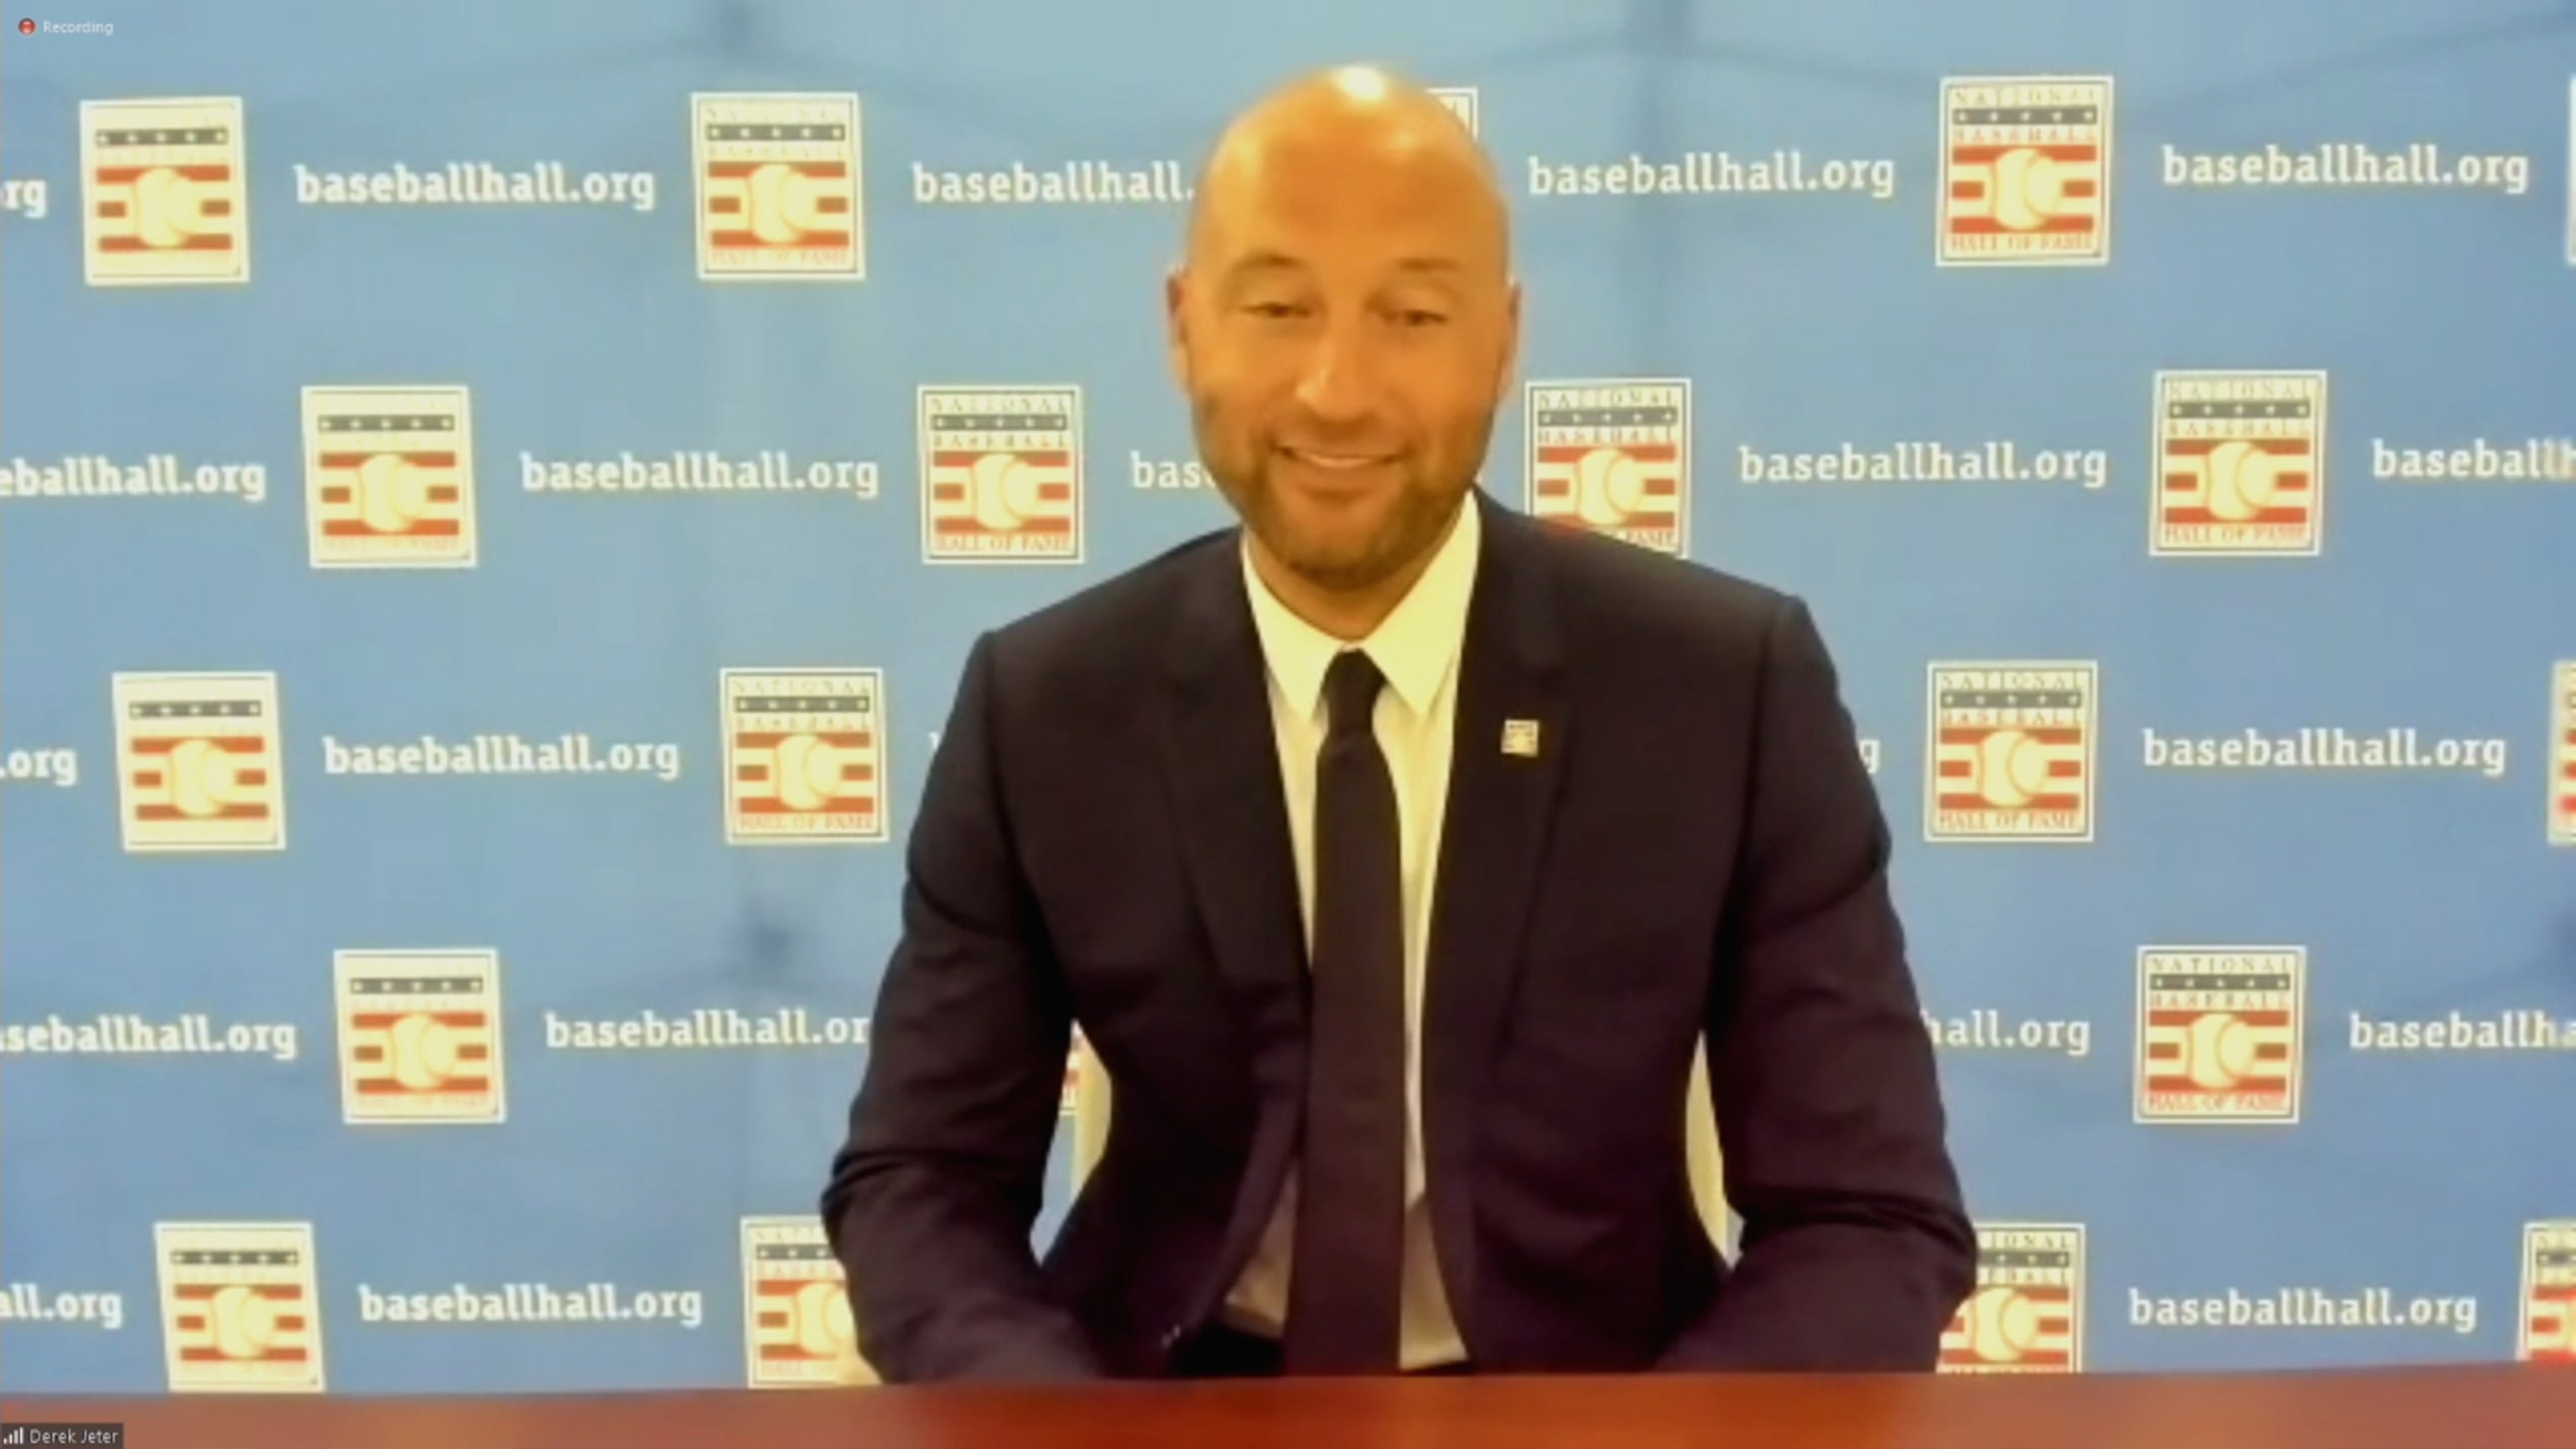 Yankees great Derek Jeter takes shot at lone Hall of Fame snubber in iconic induction  speech 